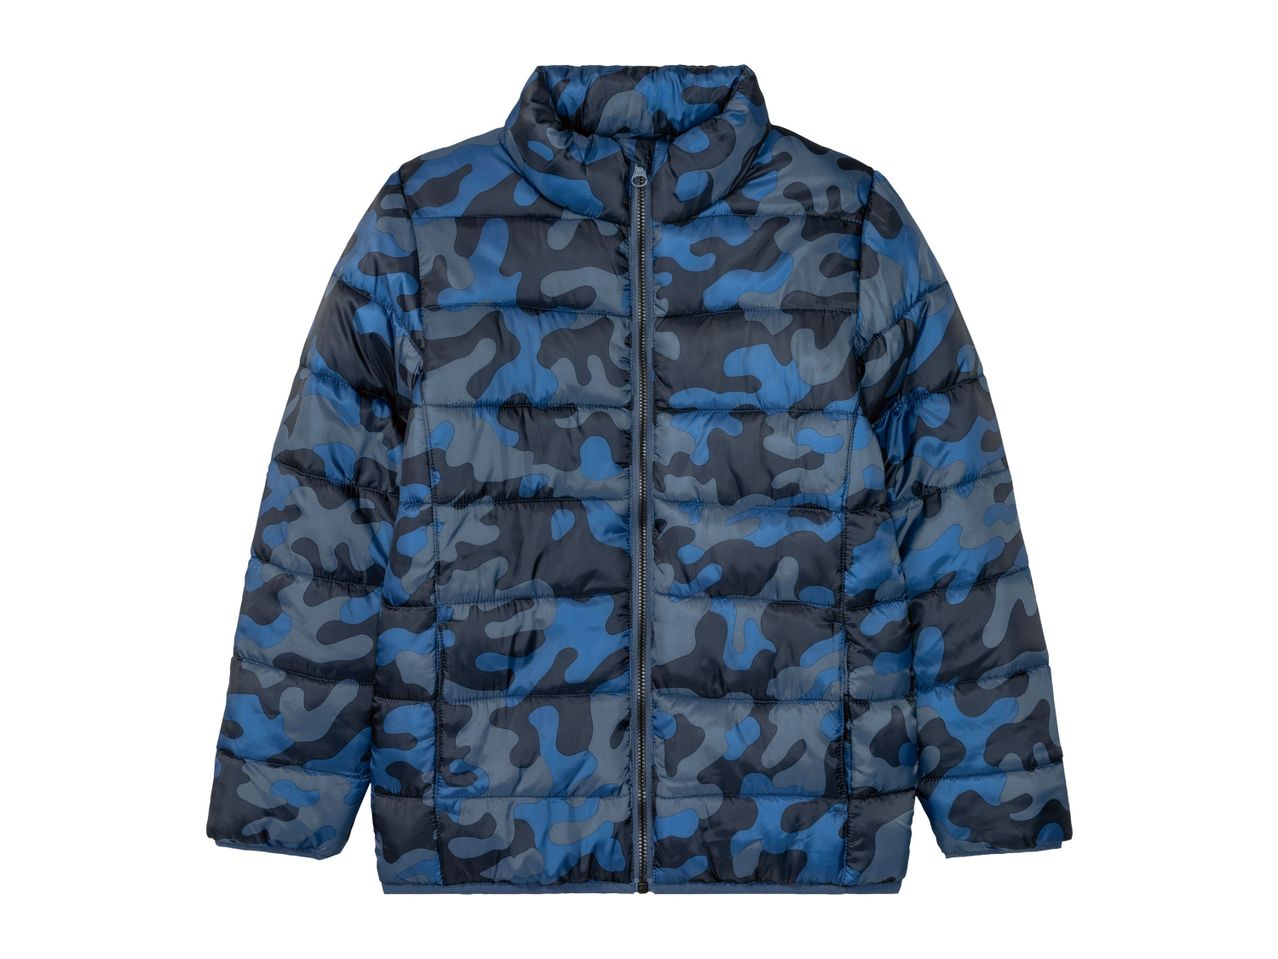 Go to full screen view: Boy’s Lightweight Jacket - Image 1